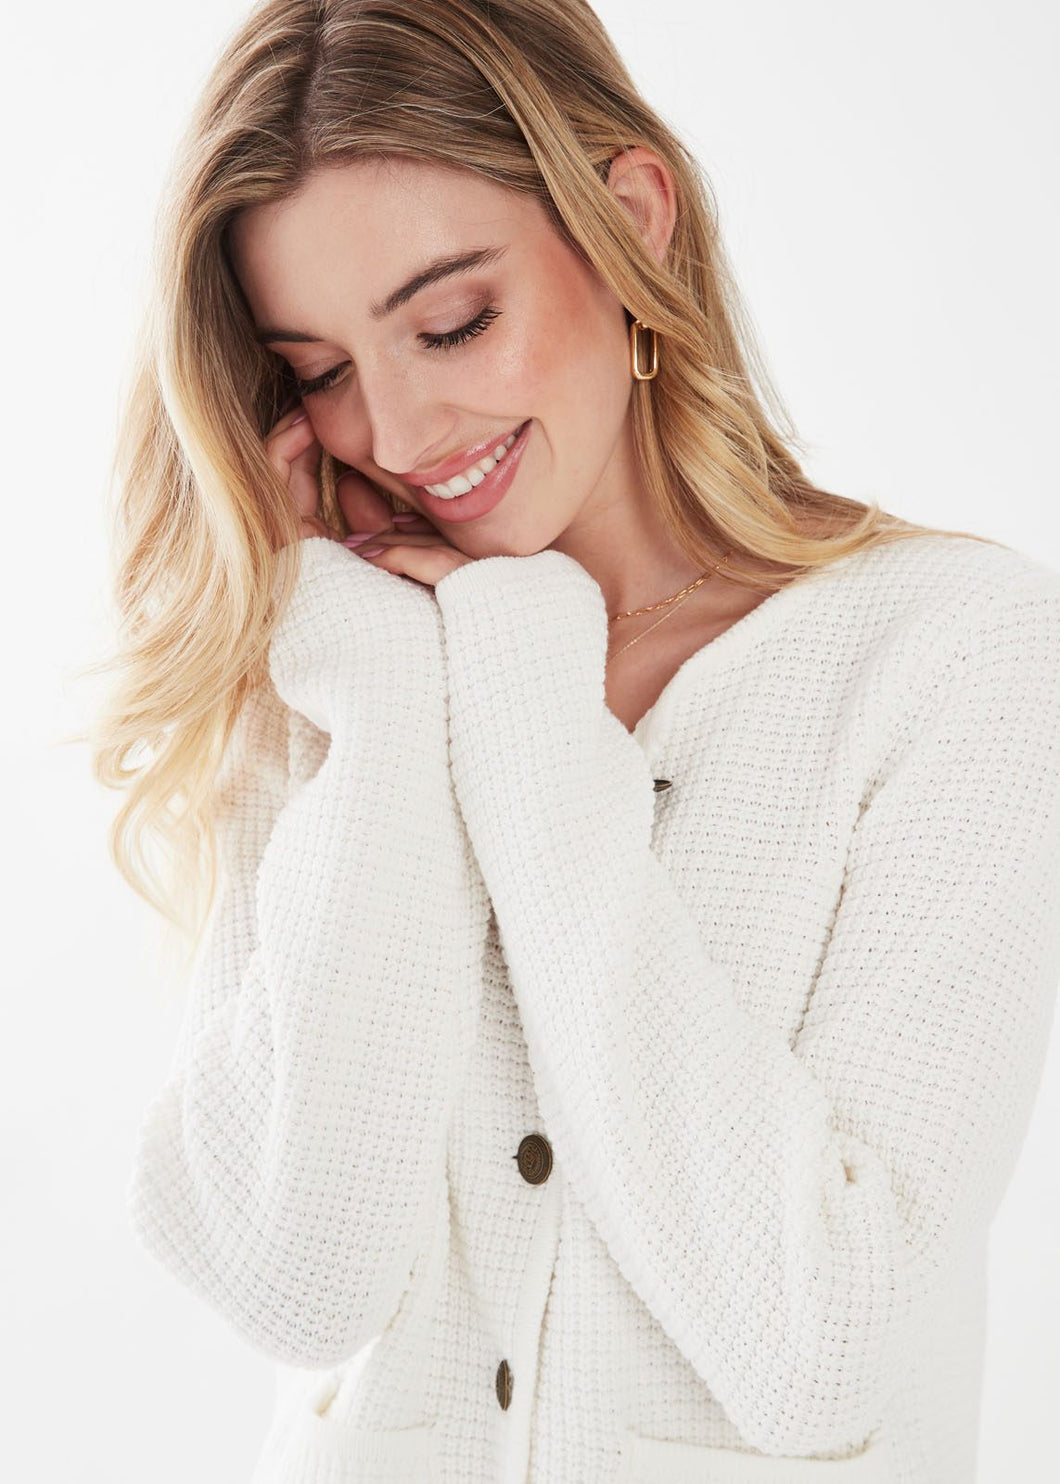 This beautiful ivory cardigan jacket features classic antique gold buttons, adding a sophisticated accent to your look while providing functionality. It can be worn alone or layered over a top, making it a versatile and stylish choice for any outfit.  Color- Ivory. Antique gold buttons. Button down. Layer over top or wear alone. Waffle knit. Front functional pockets.